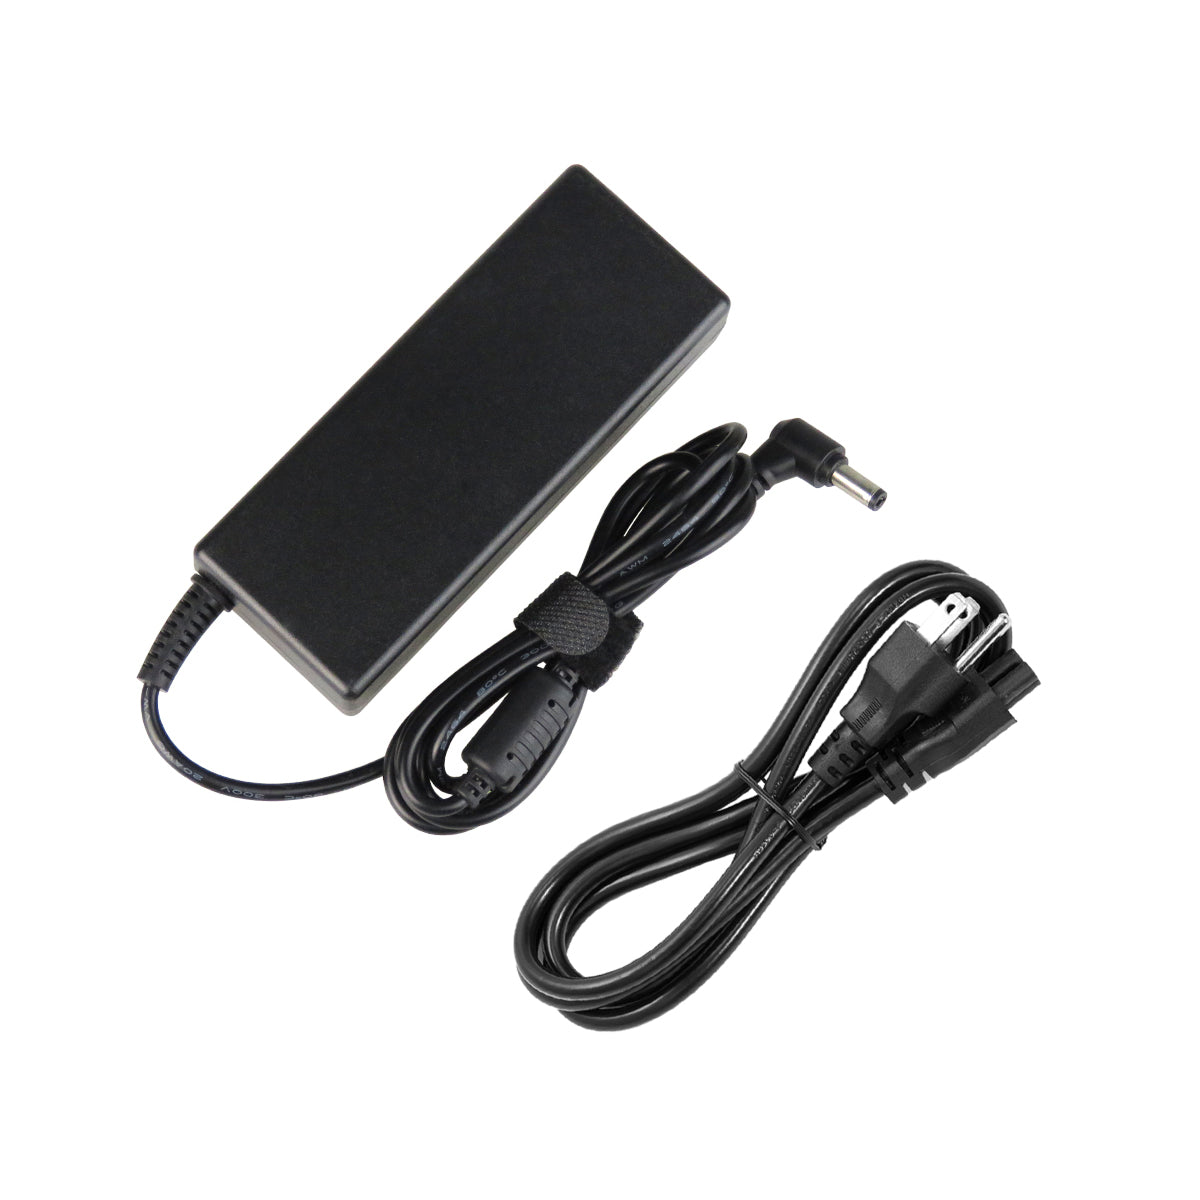 AC Adapter Charger for ASUS N73JF Notebook.